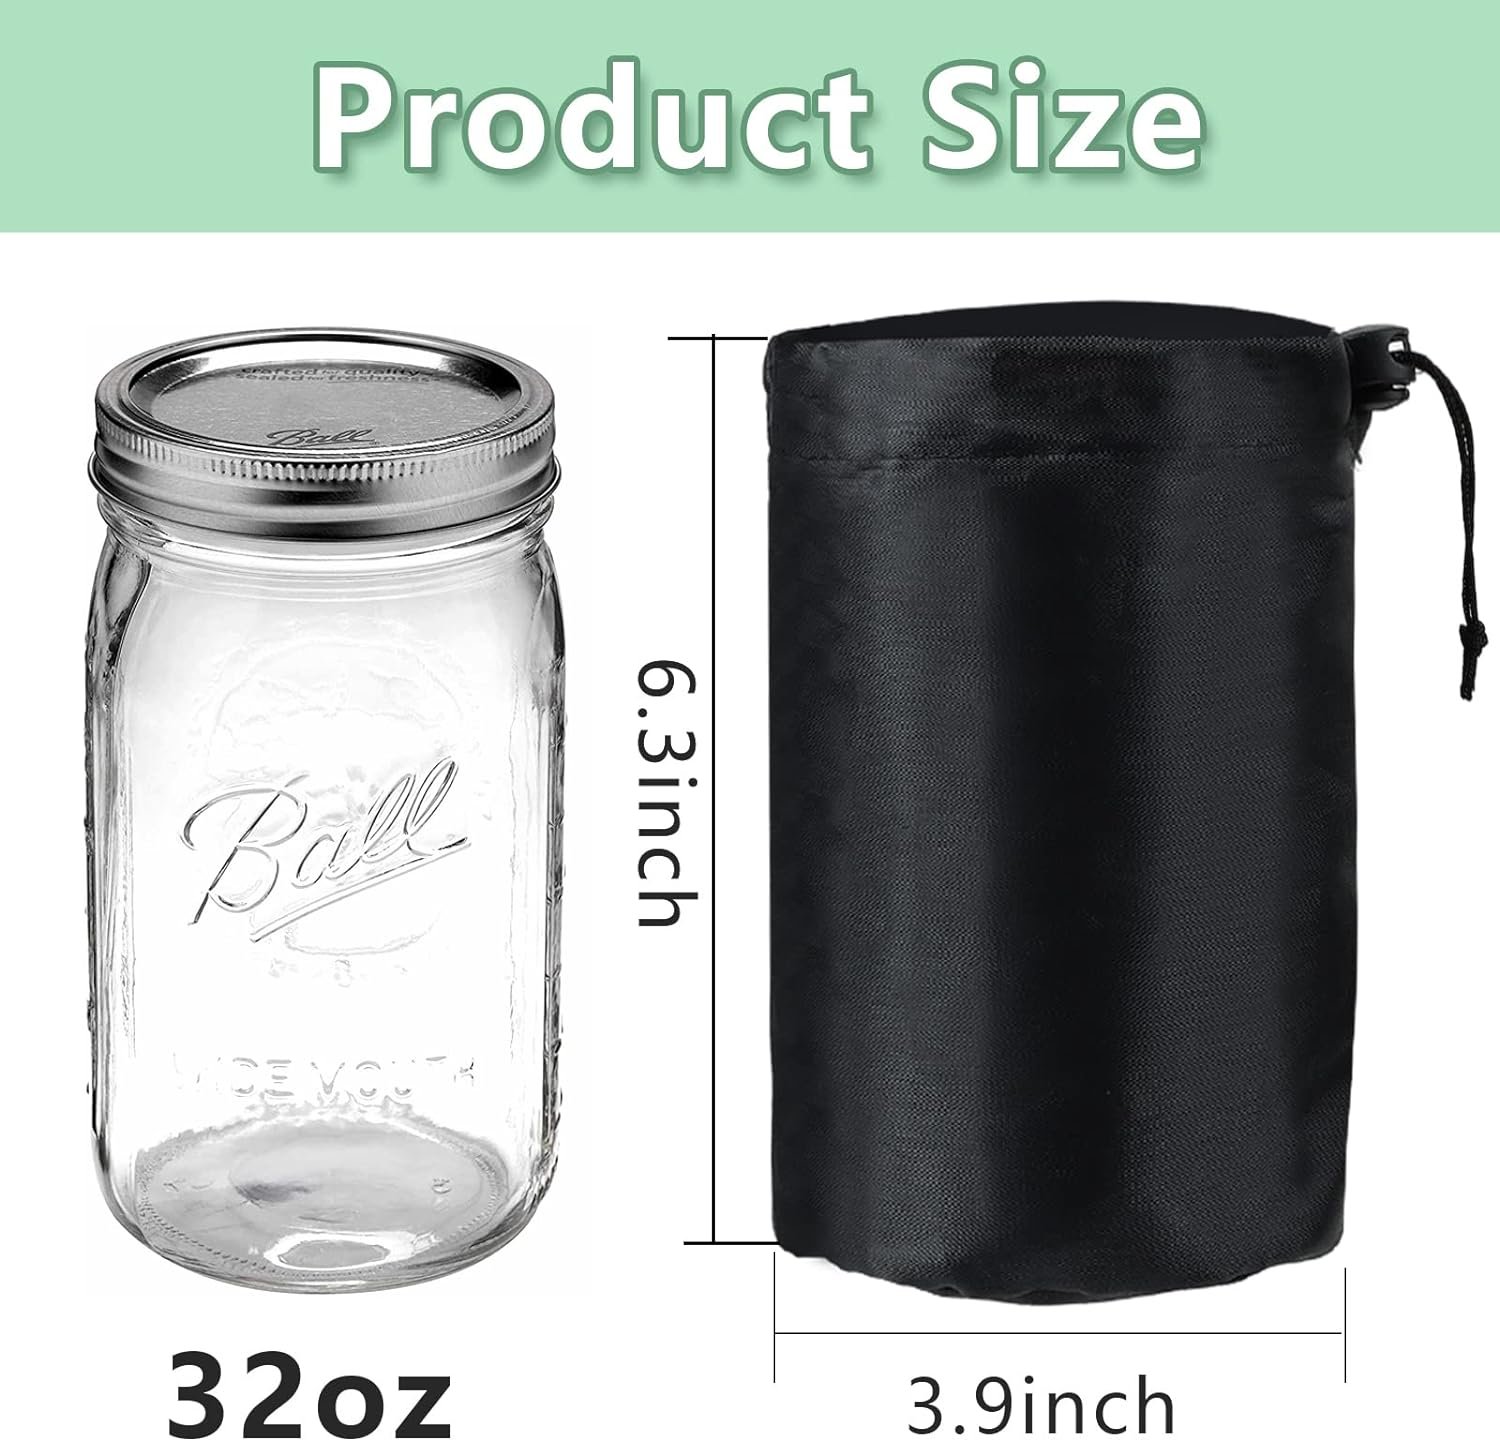 12Pcs Kratky Blackout Sleeves for Ball Mason Jars 32 Oz, Black Wide Mouth Mason Jar Grow Cover, Hydroponic Container Sheath, Sprouting Jars Sleeves for Help Plants Grow Healthily of Kratky